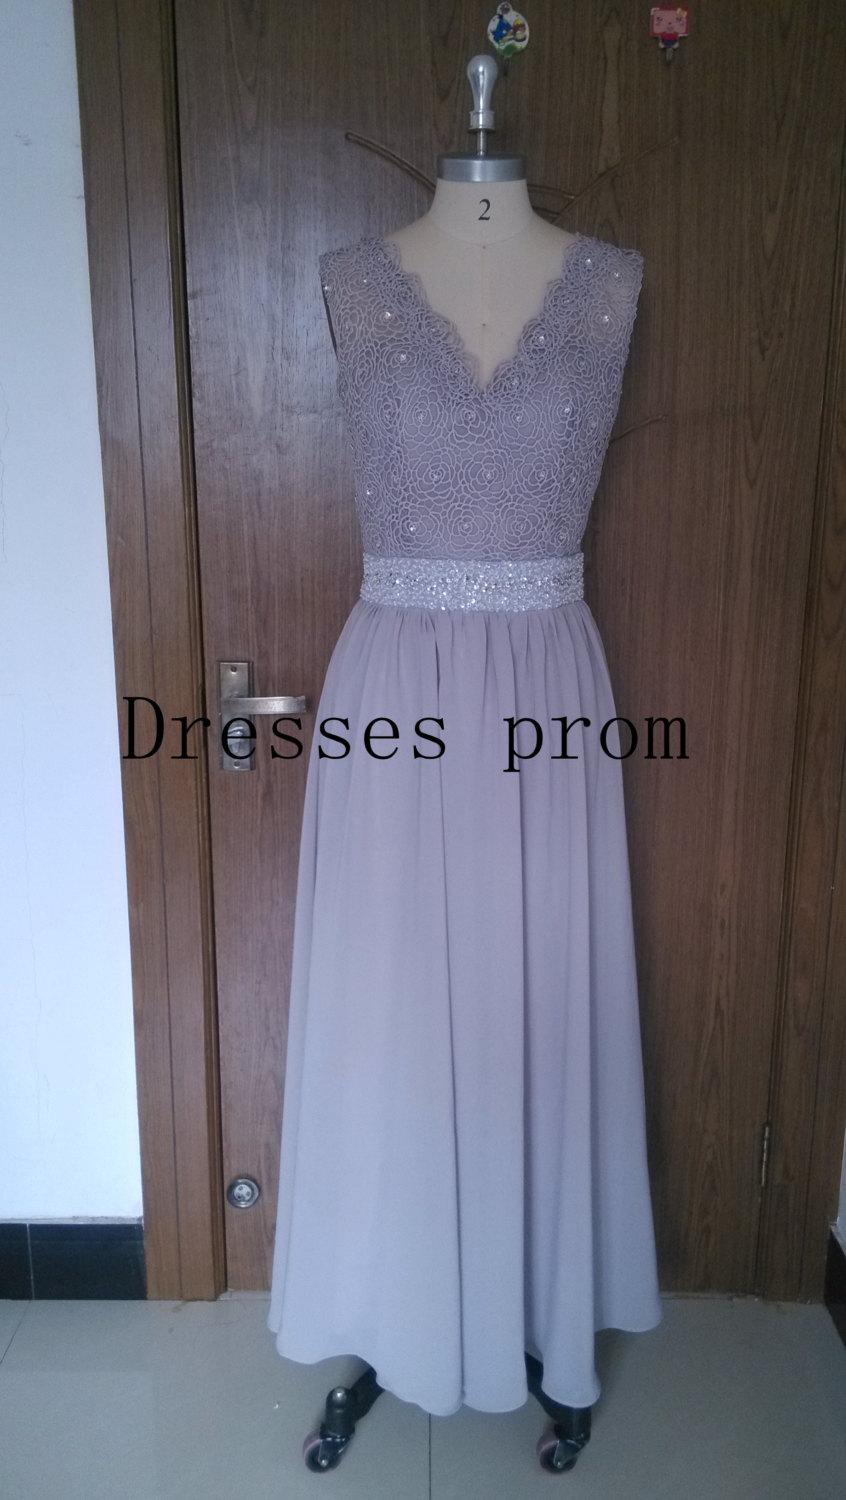 Mariage - Grey Long Lace Bridesmaid Dress A-line Chiffon Dress With cap sleeves and open back prom dress